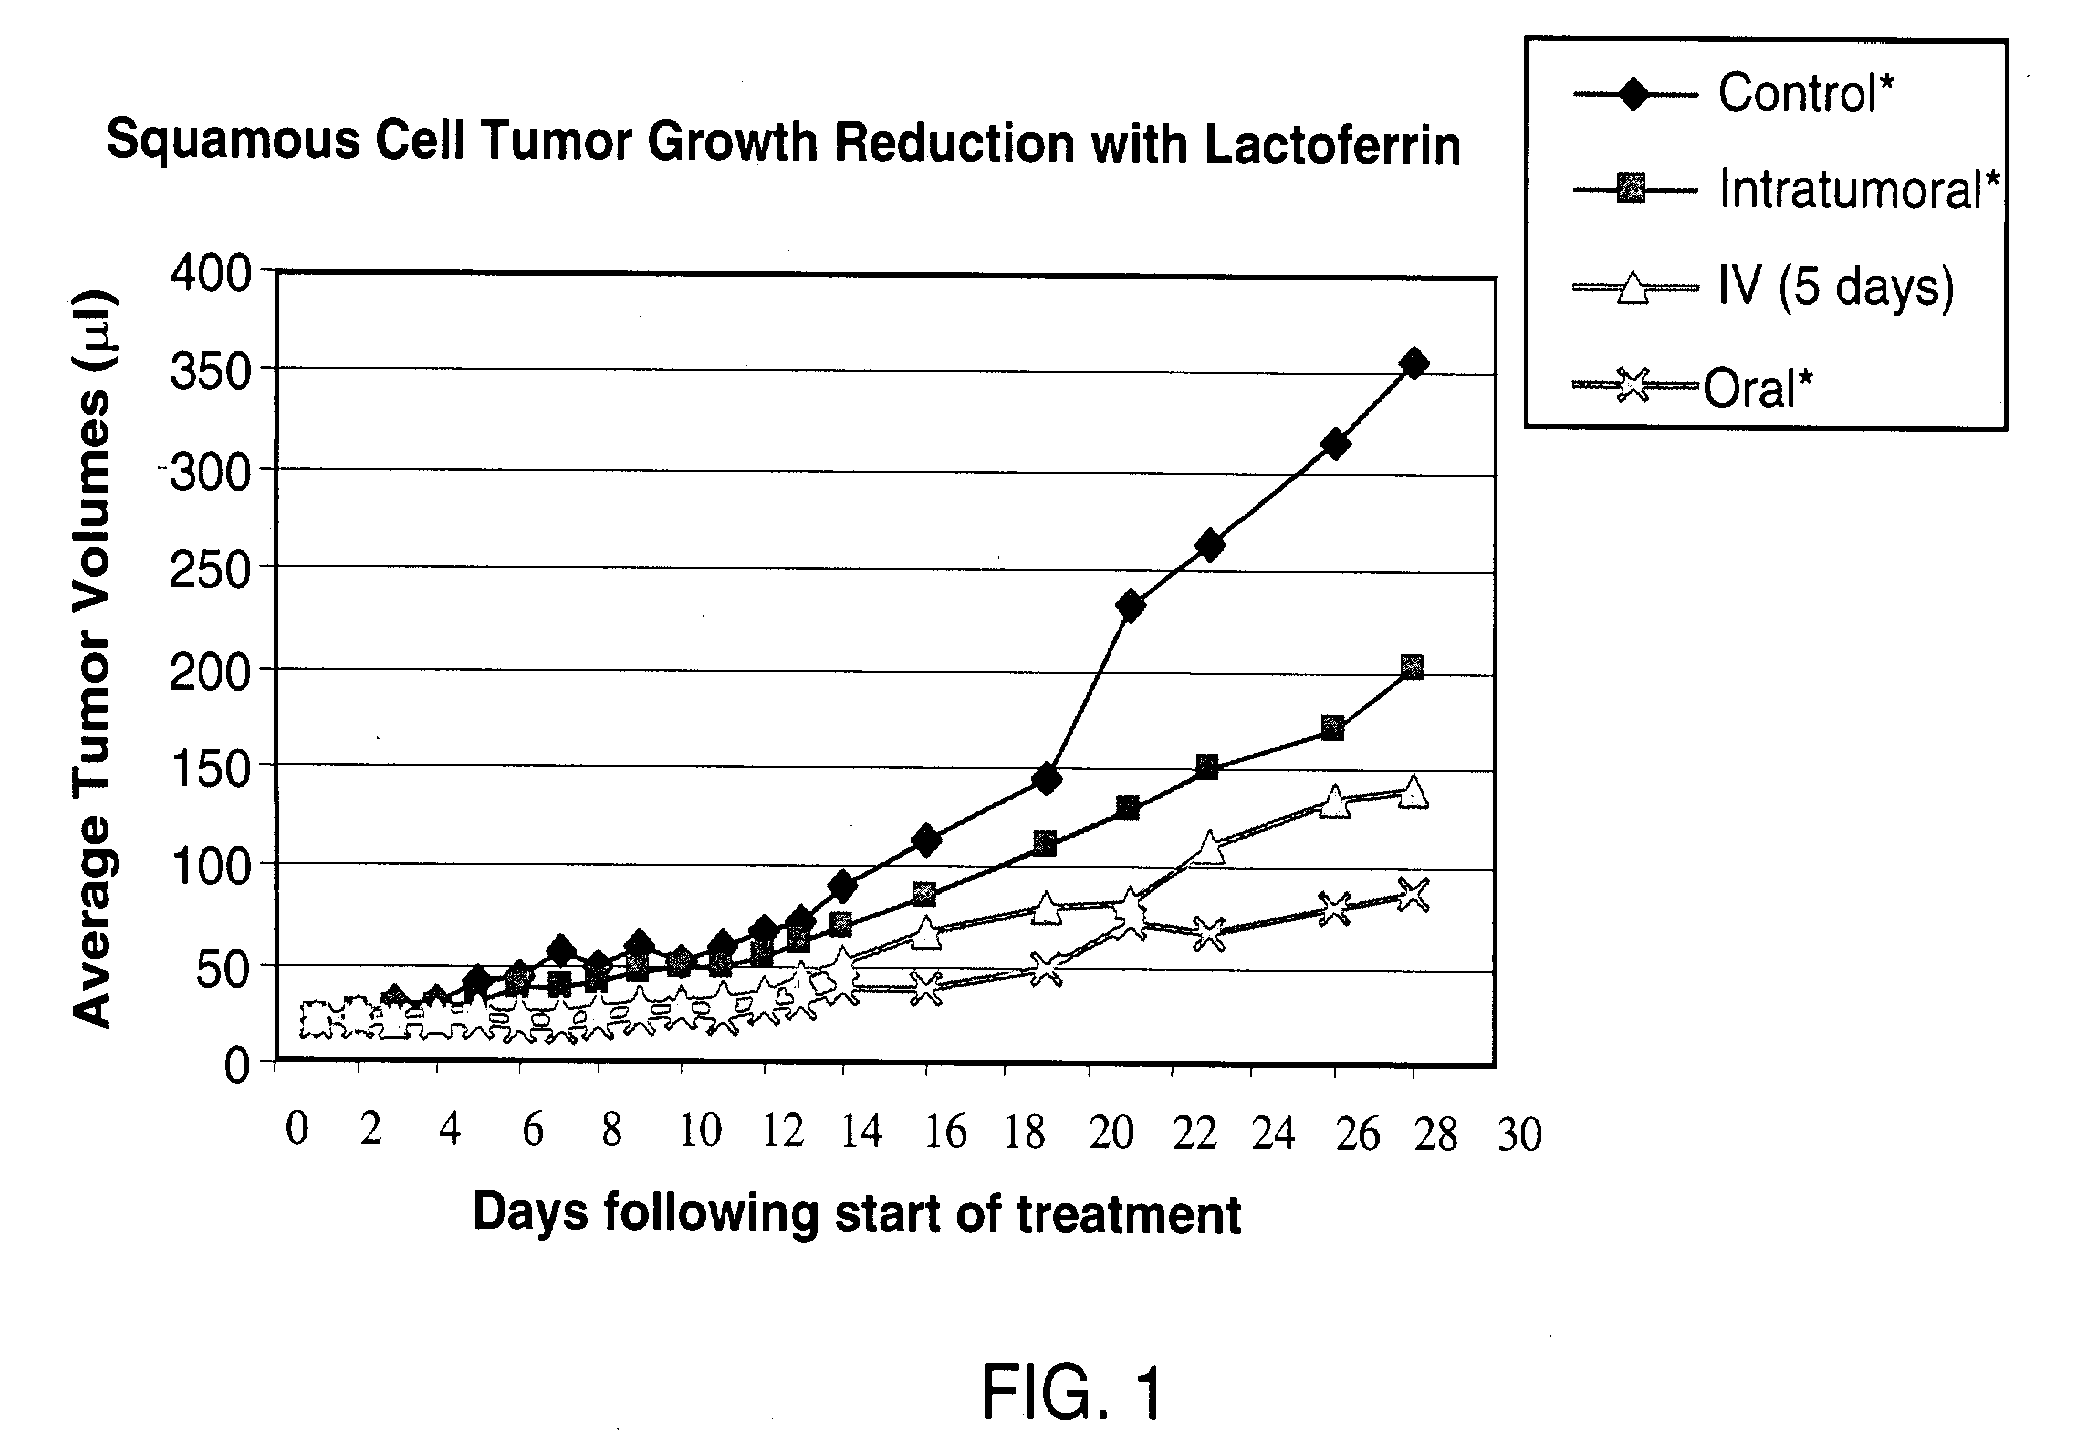 Intratumorally administered lactoferrin in the treatment of malignantneoplasms and other hyperproliferative diseases